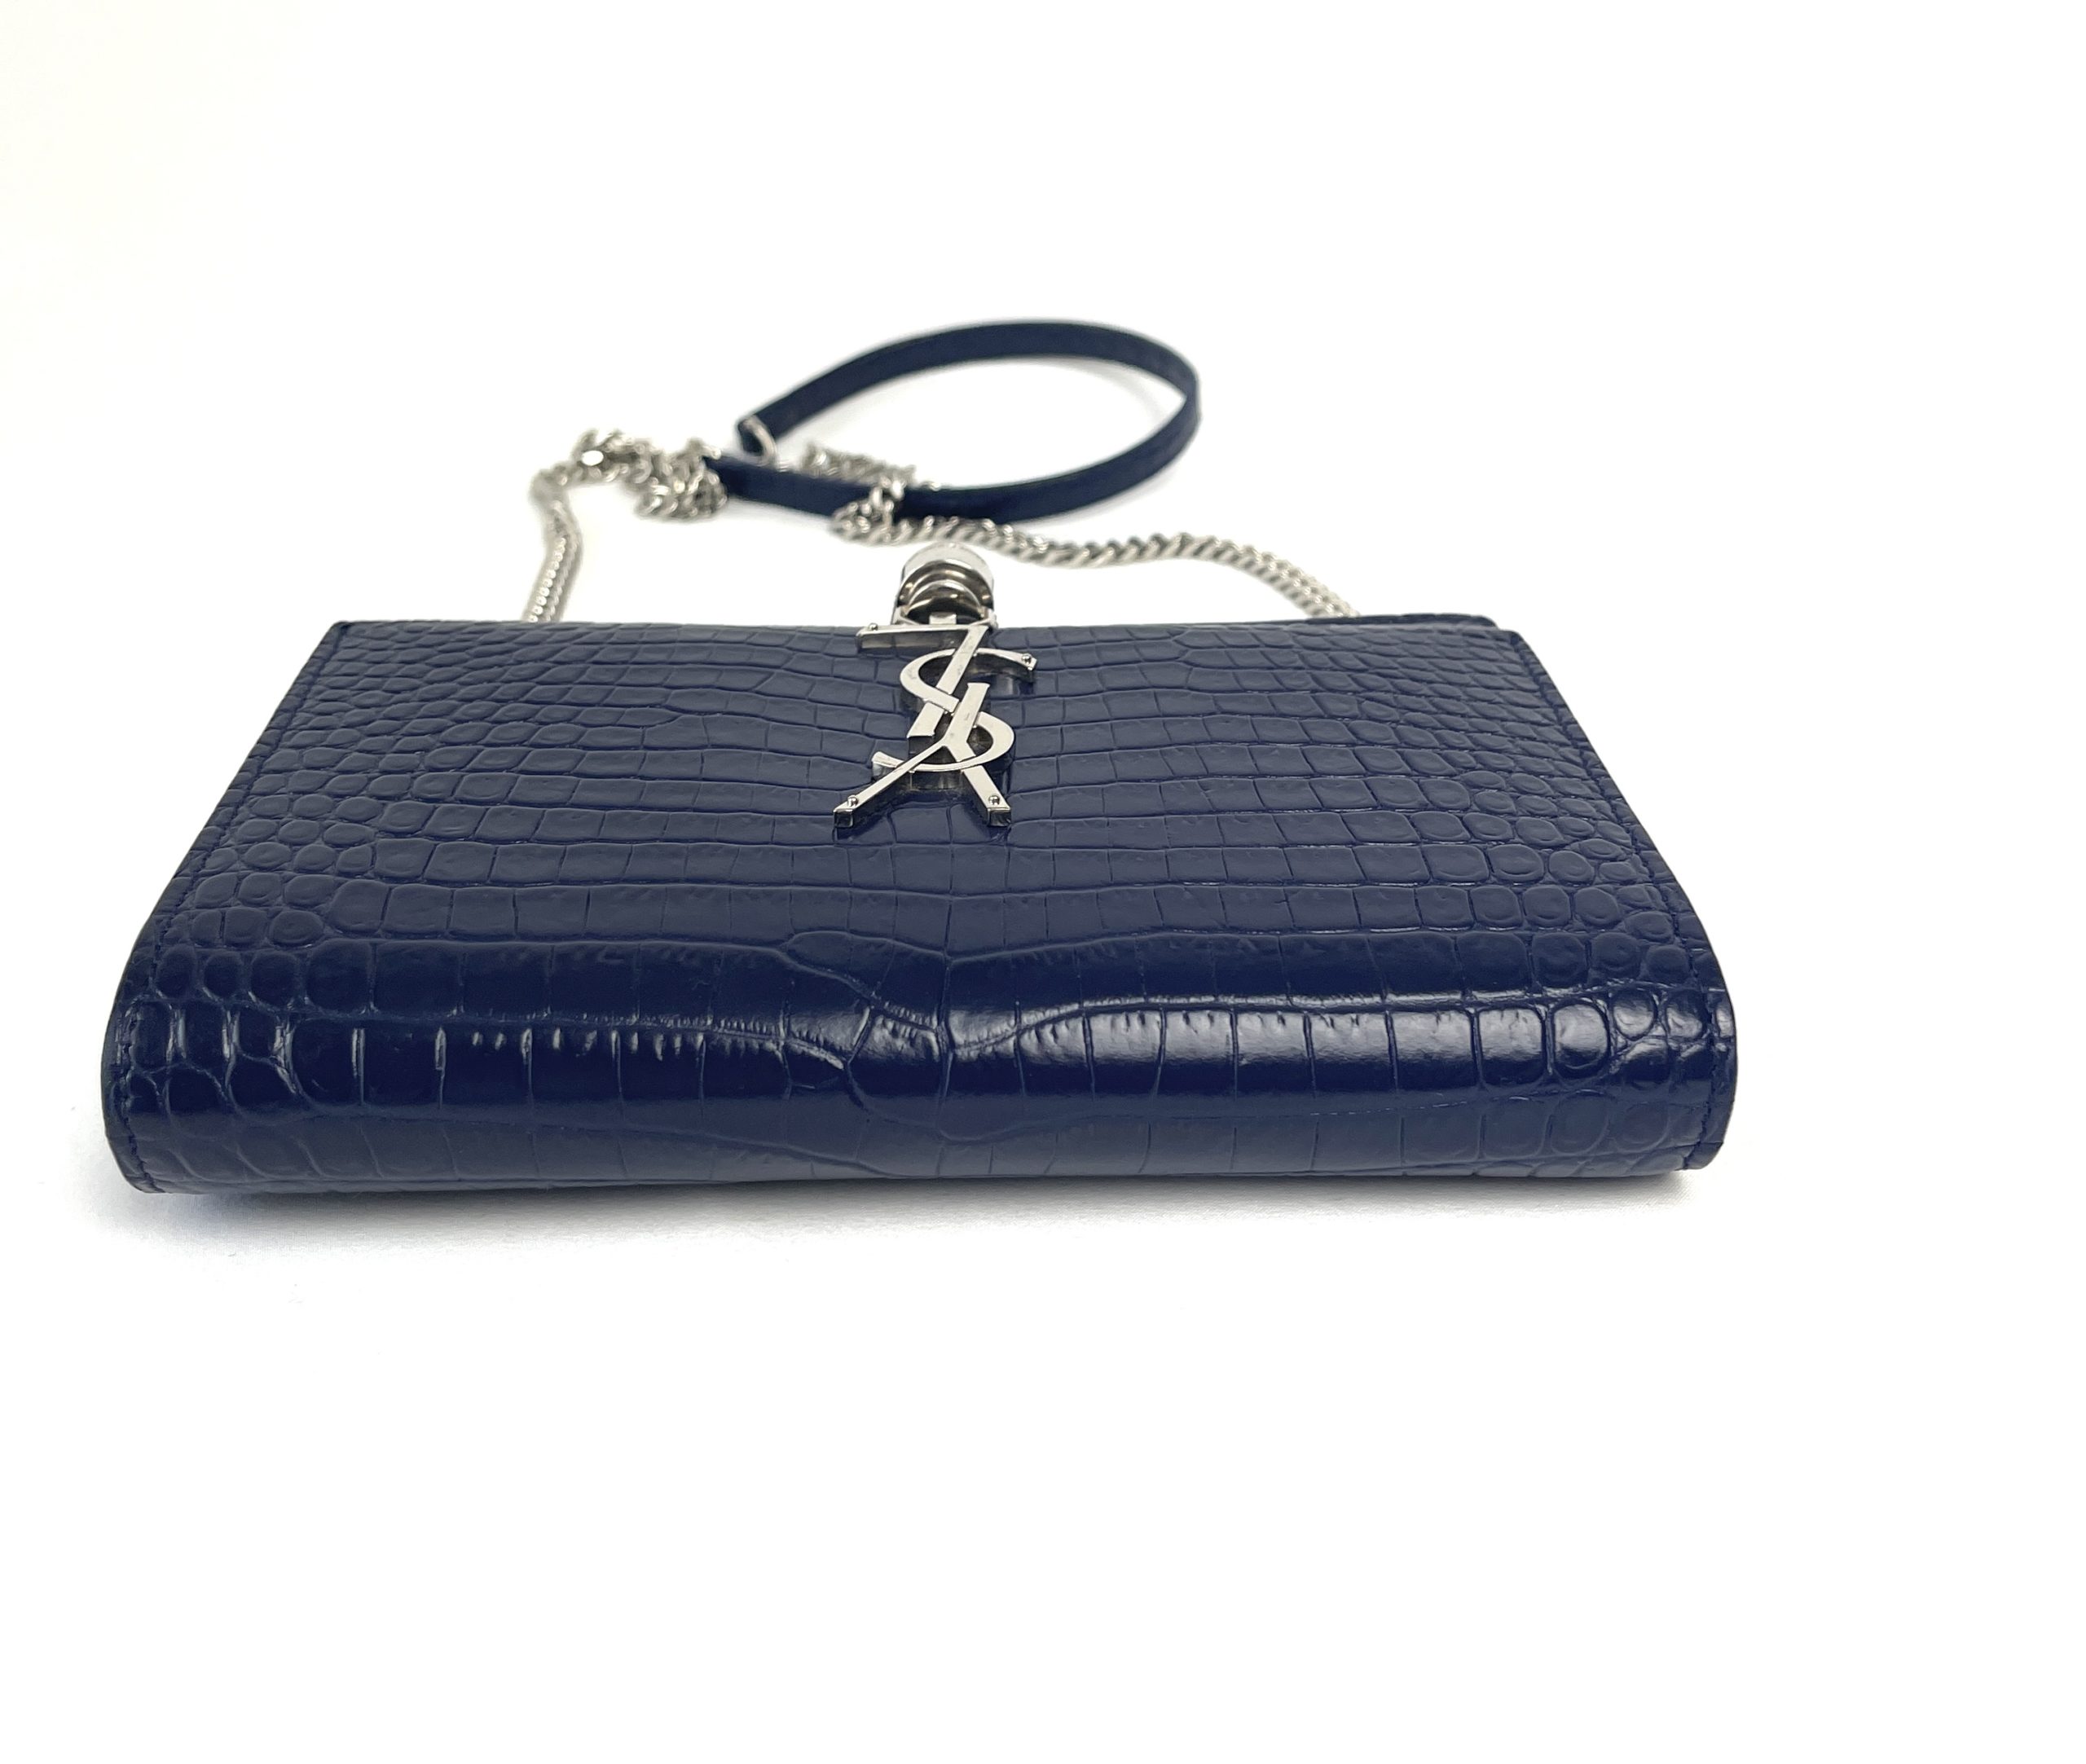 YSL Kate Navy Blue Croc Embossed Leather WOC Chain Bag with Tassel